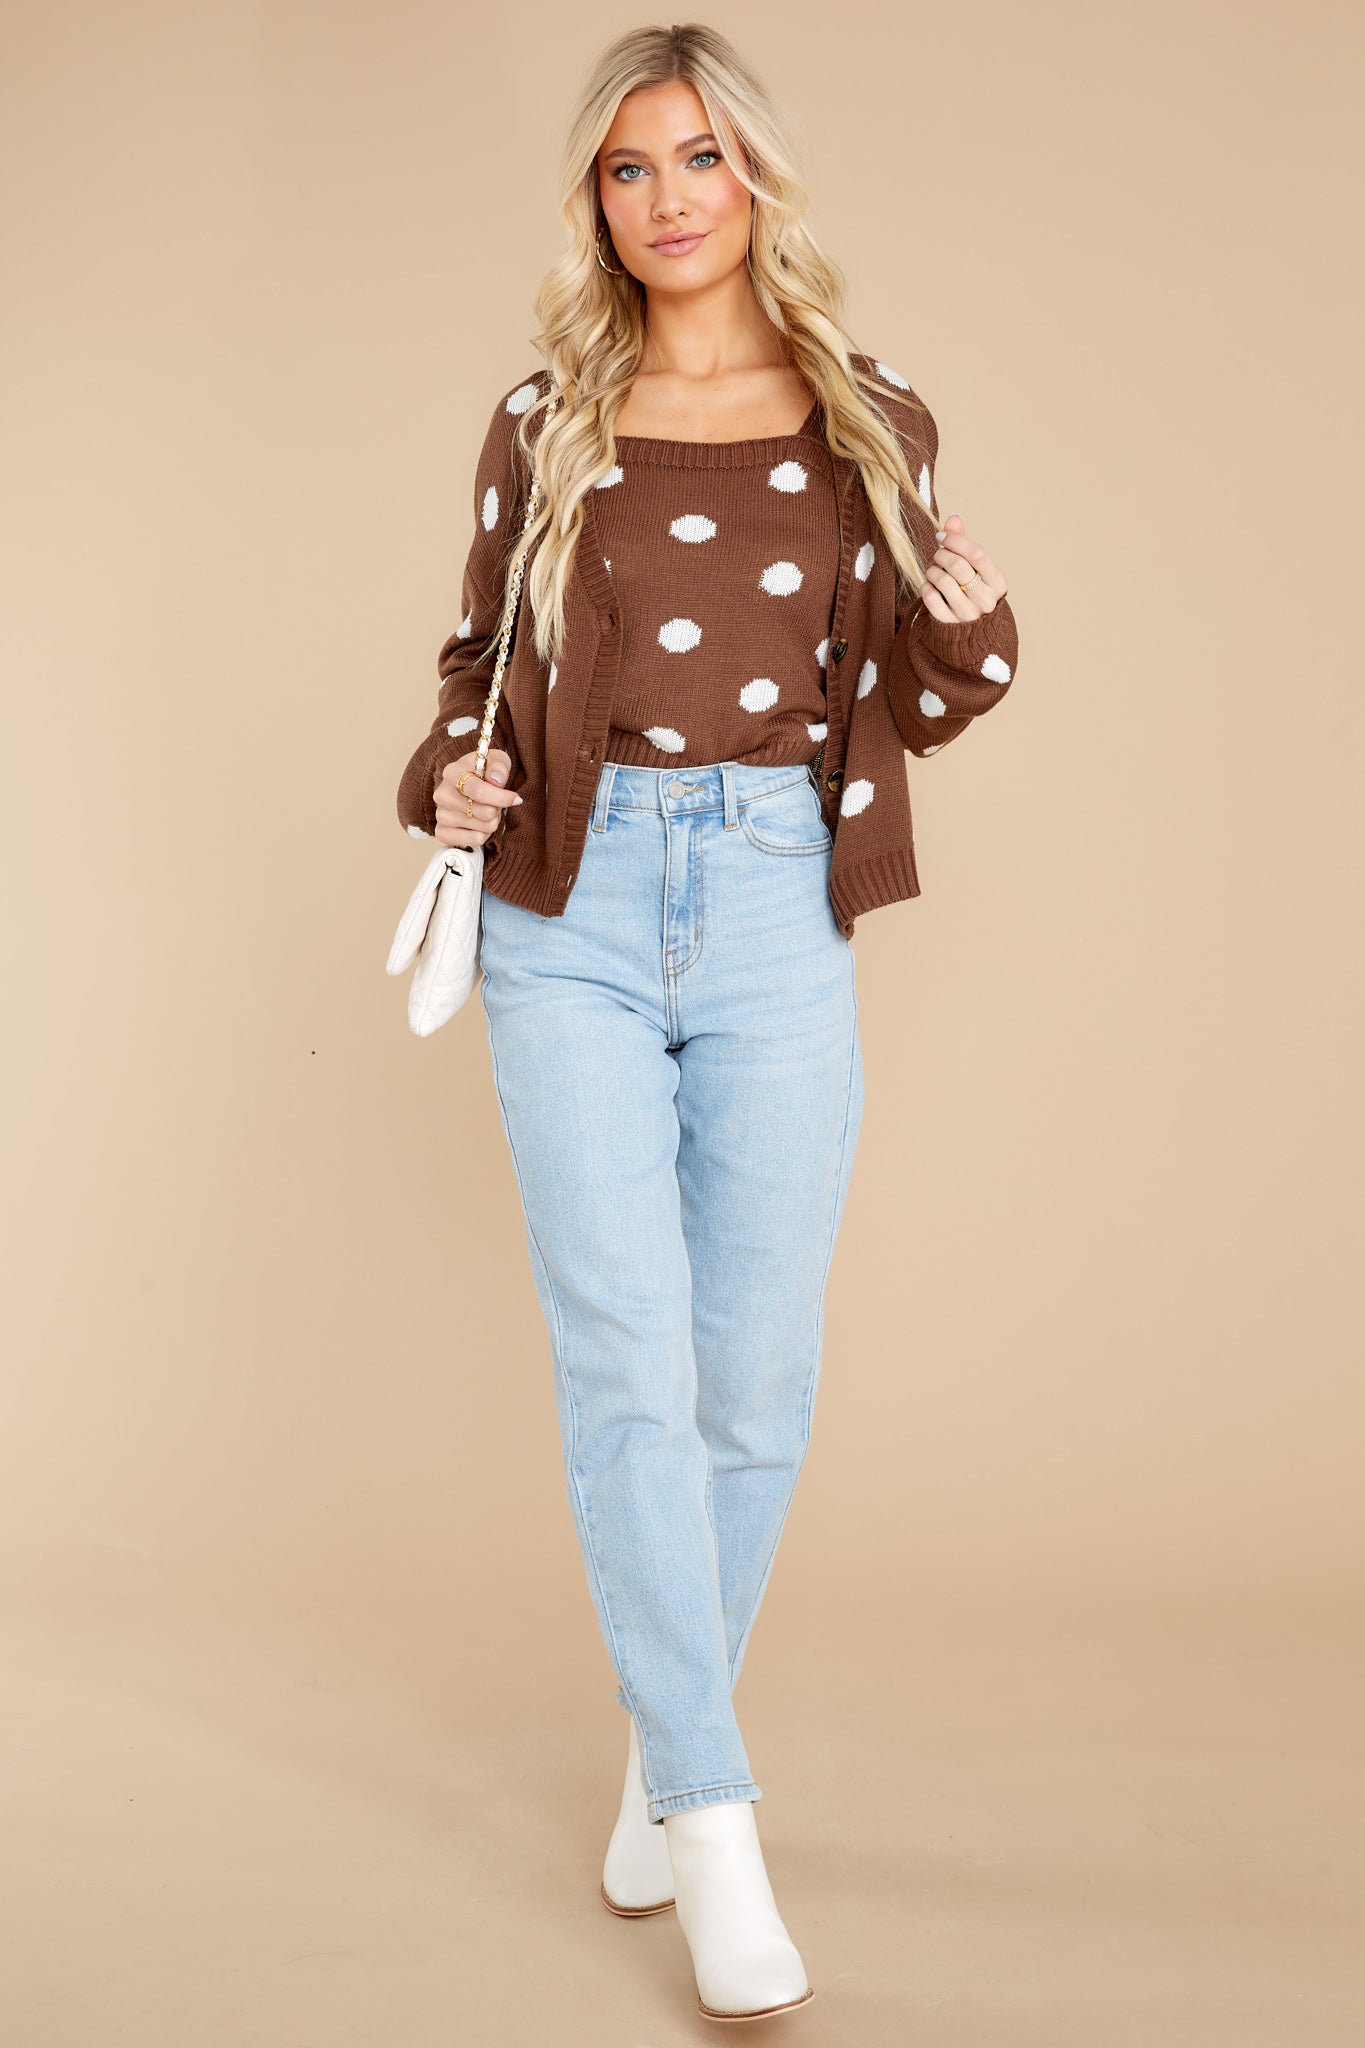 Caught My Attention Cocoa Polka Dot Cardigan